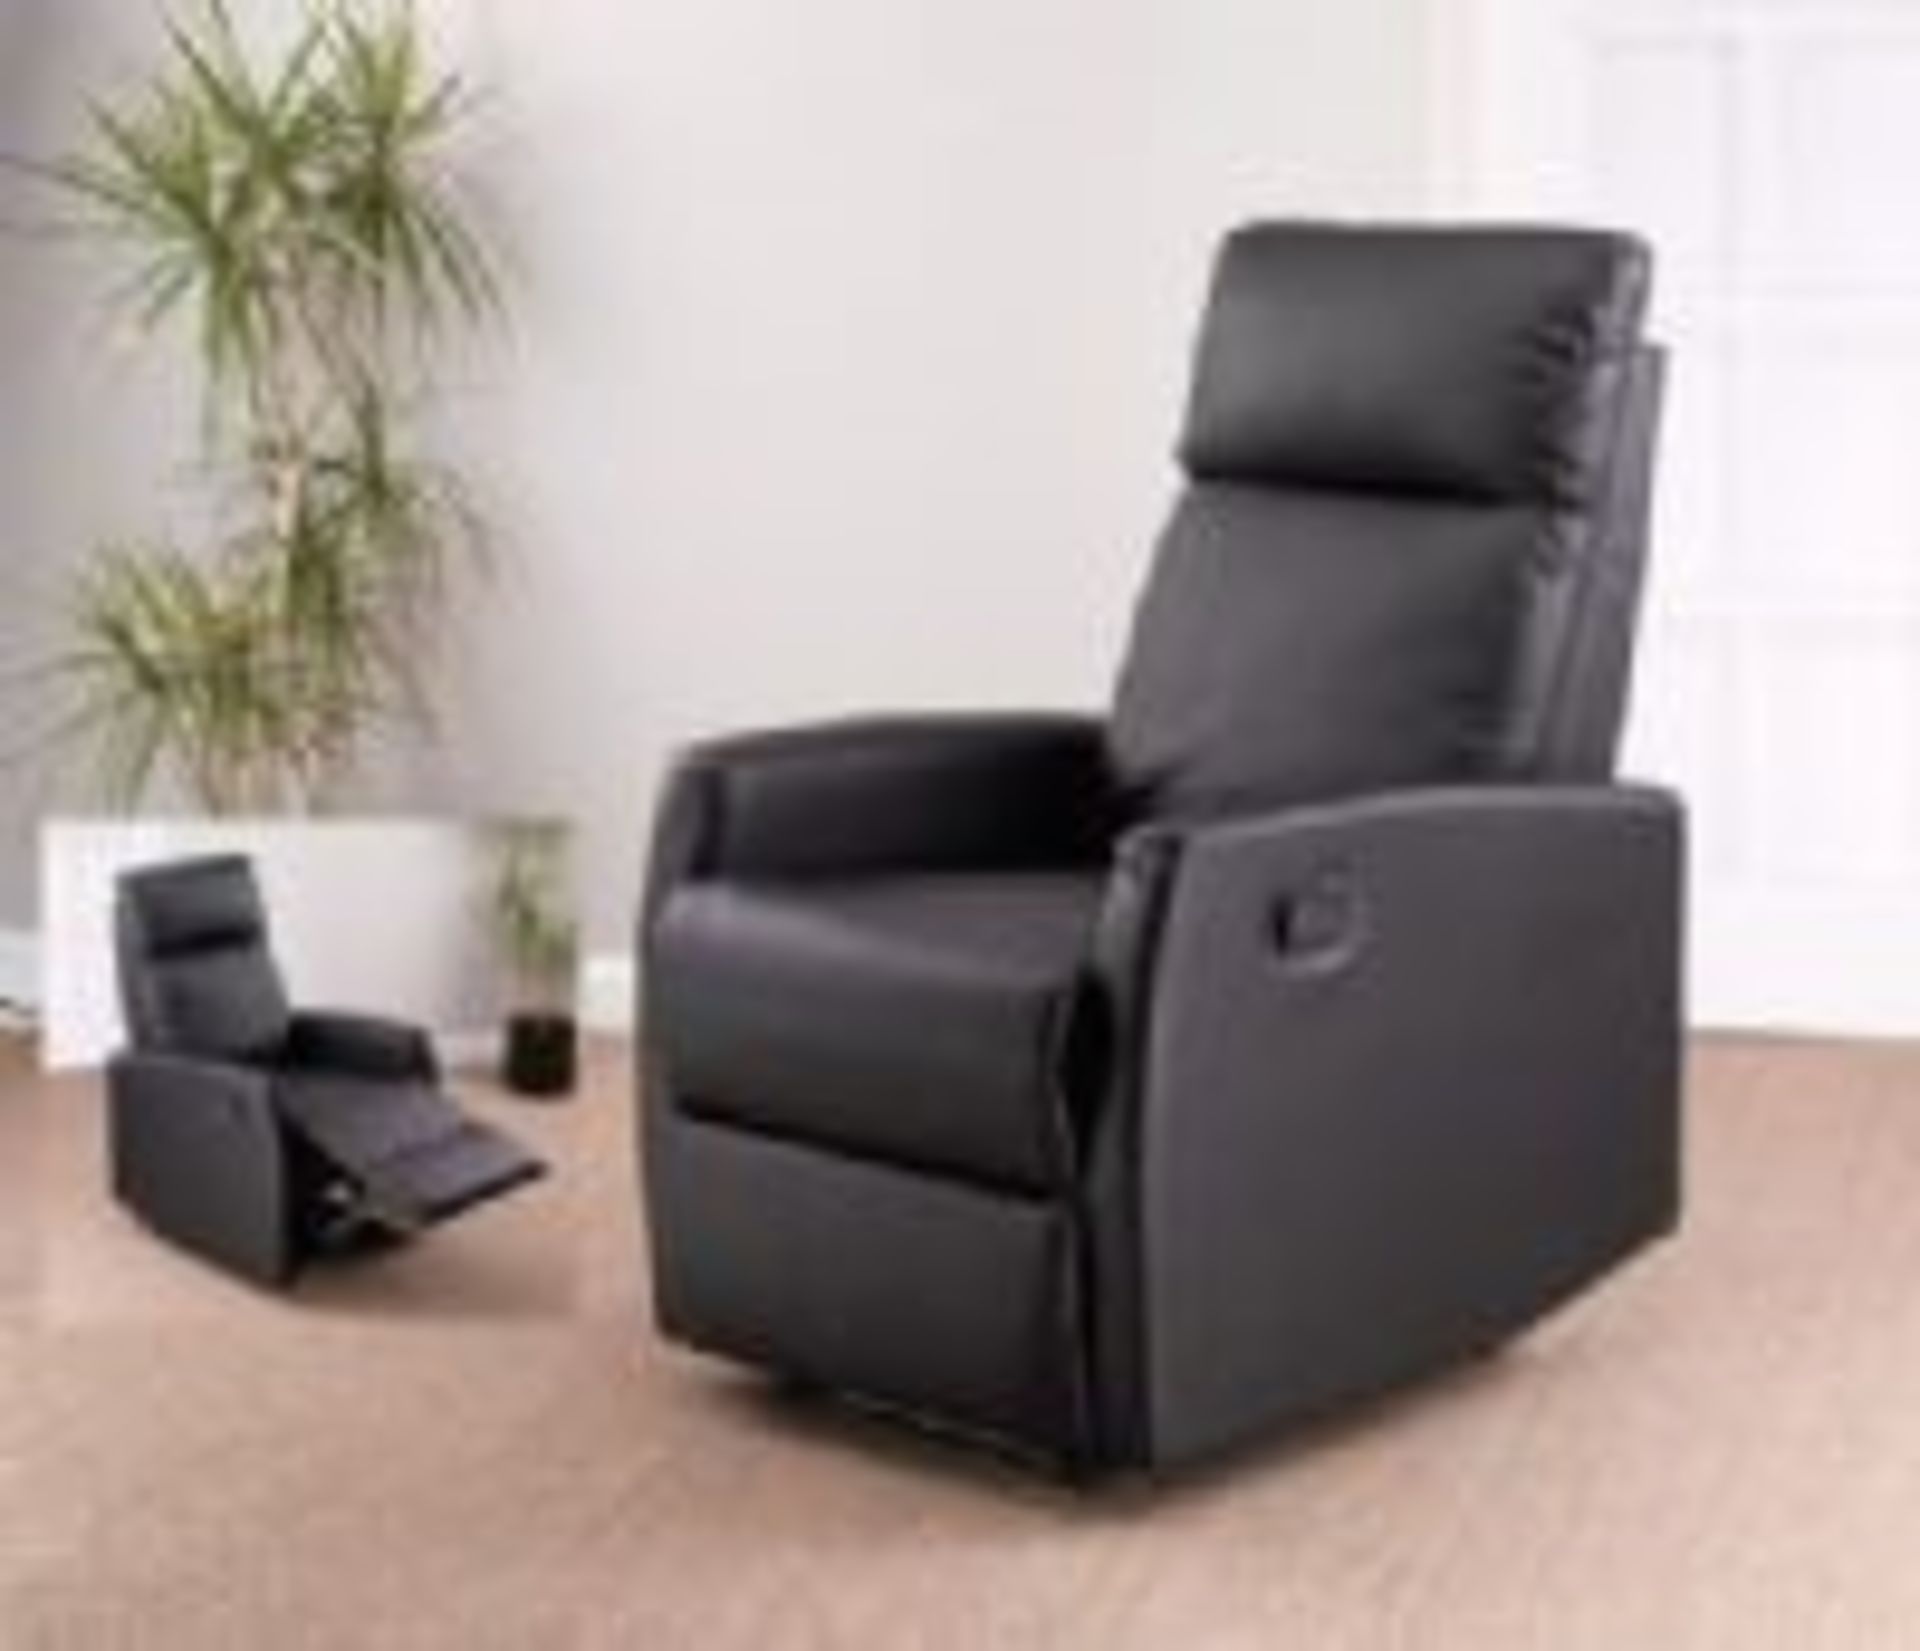 1 x "Venice" Recliner Chair In Black Faux Leather - Features Two Recline Positions - Brand New & - Image 2 of 2